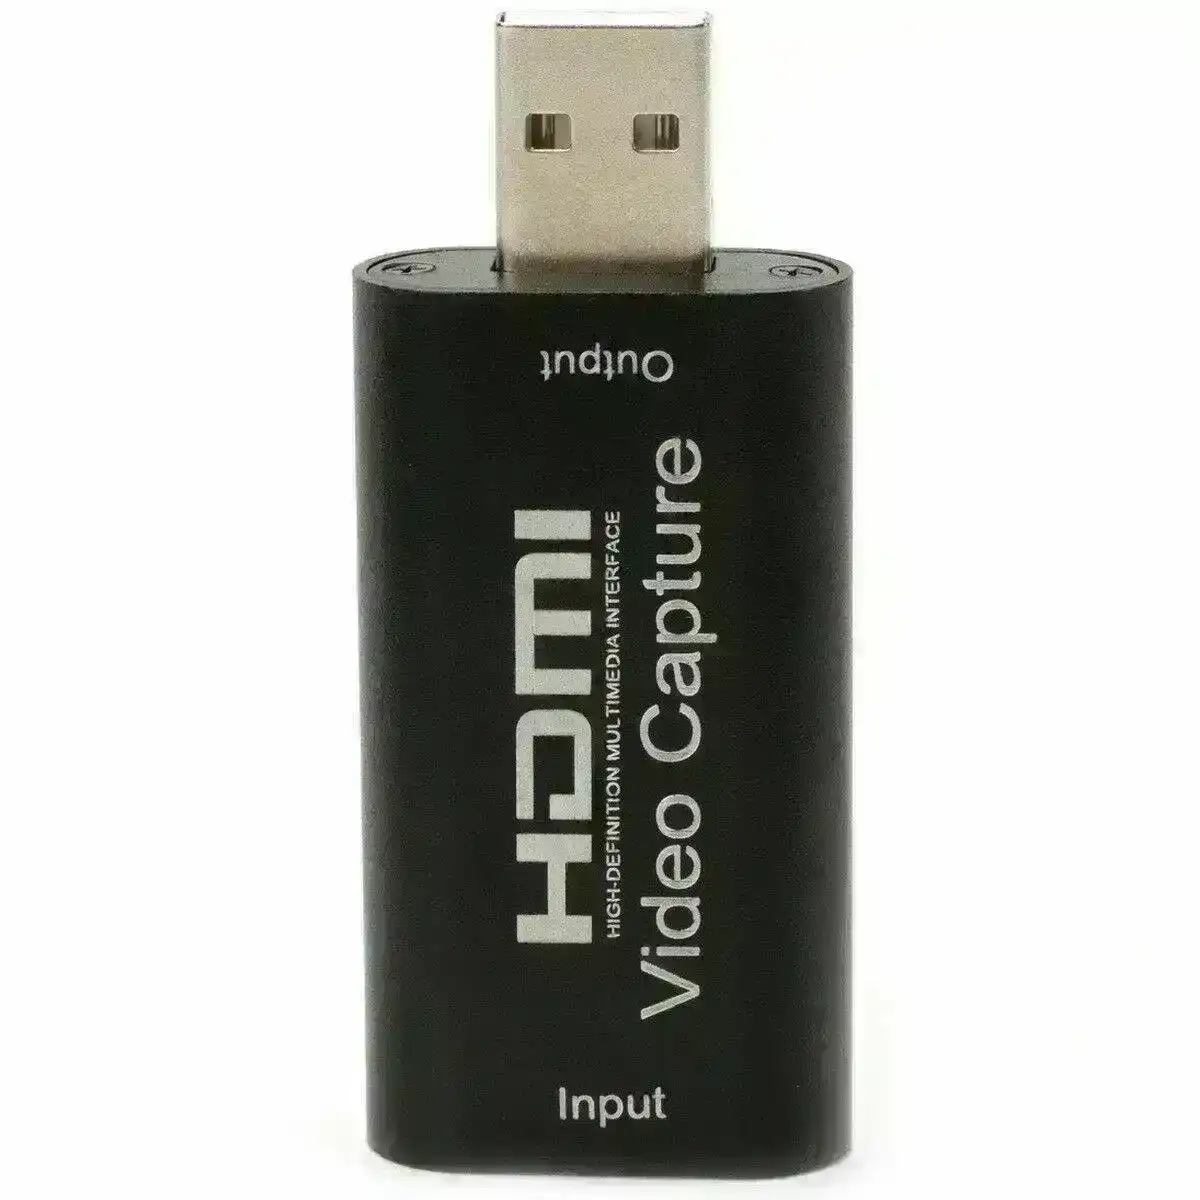 HDMI Video Capture Card USB 2.0/ HD 1080p Recorder for Game Video Live Streaming